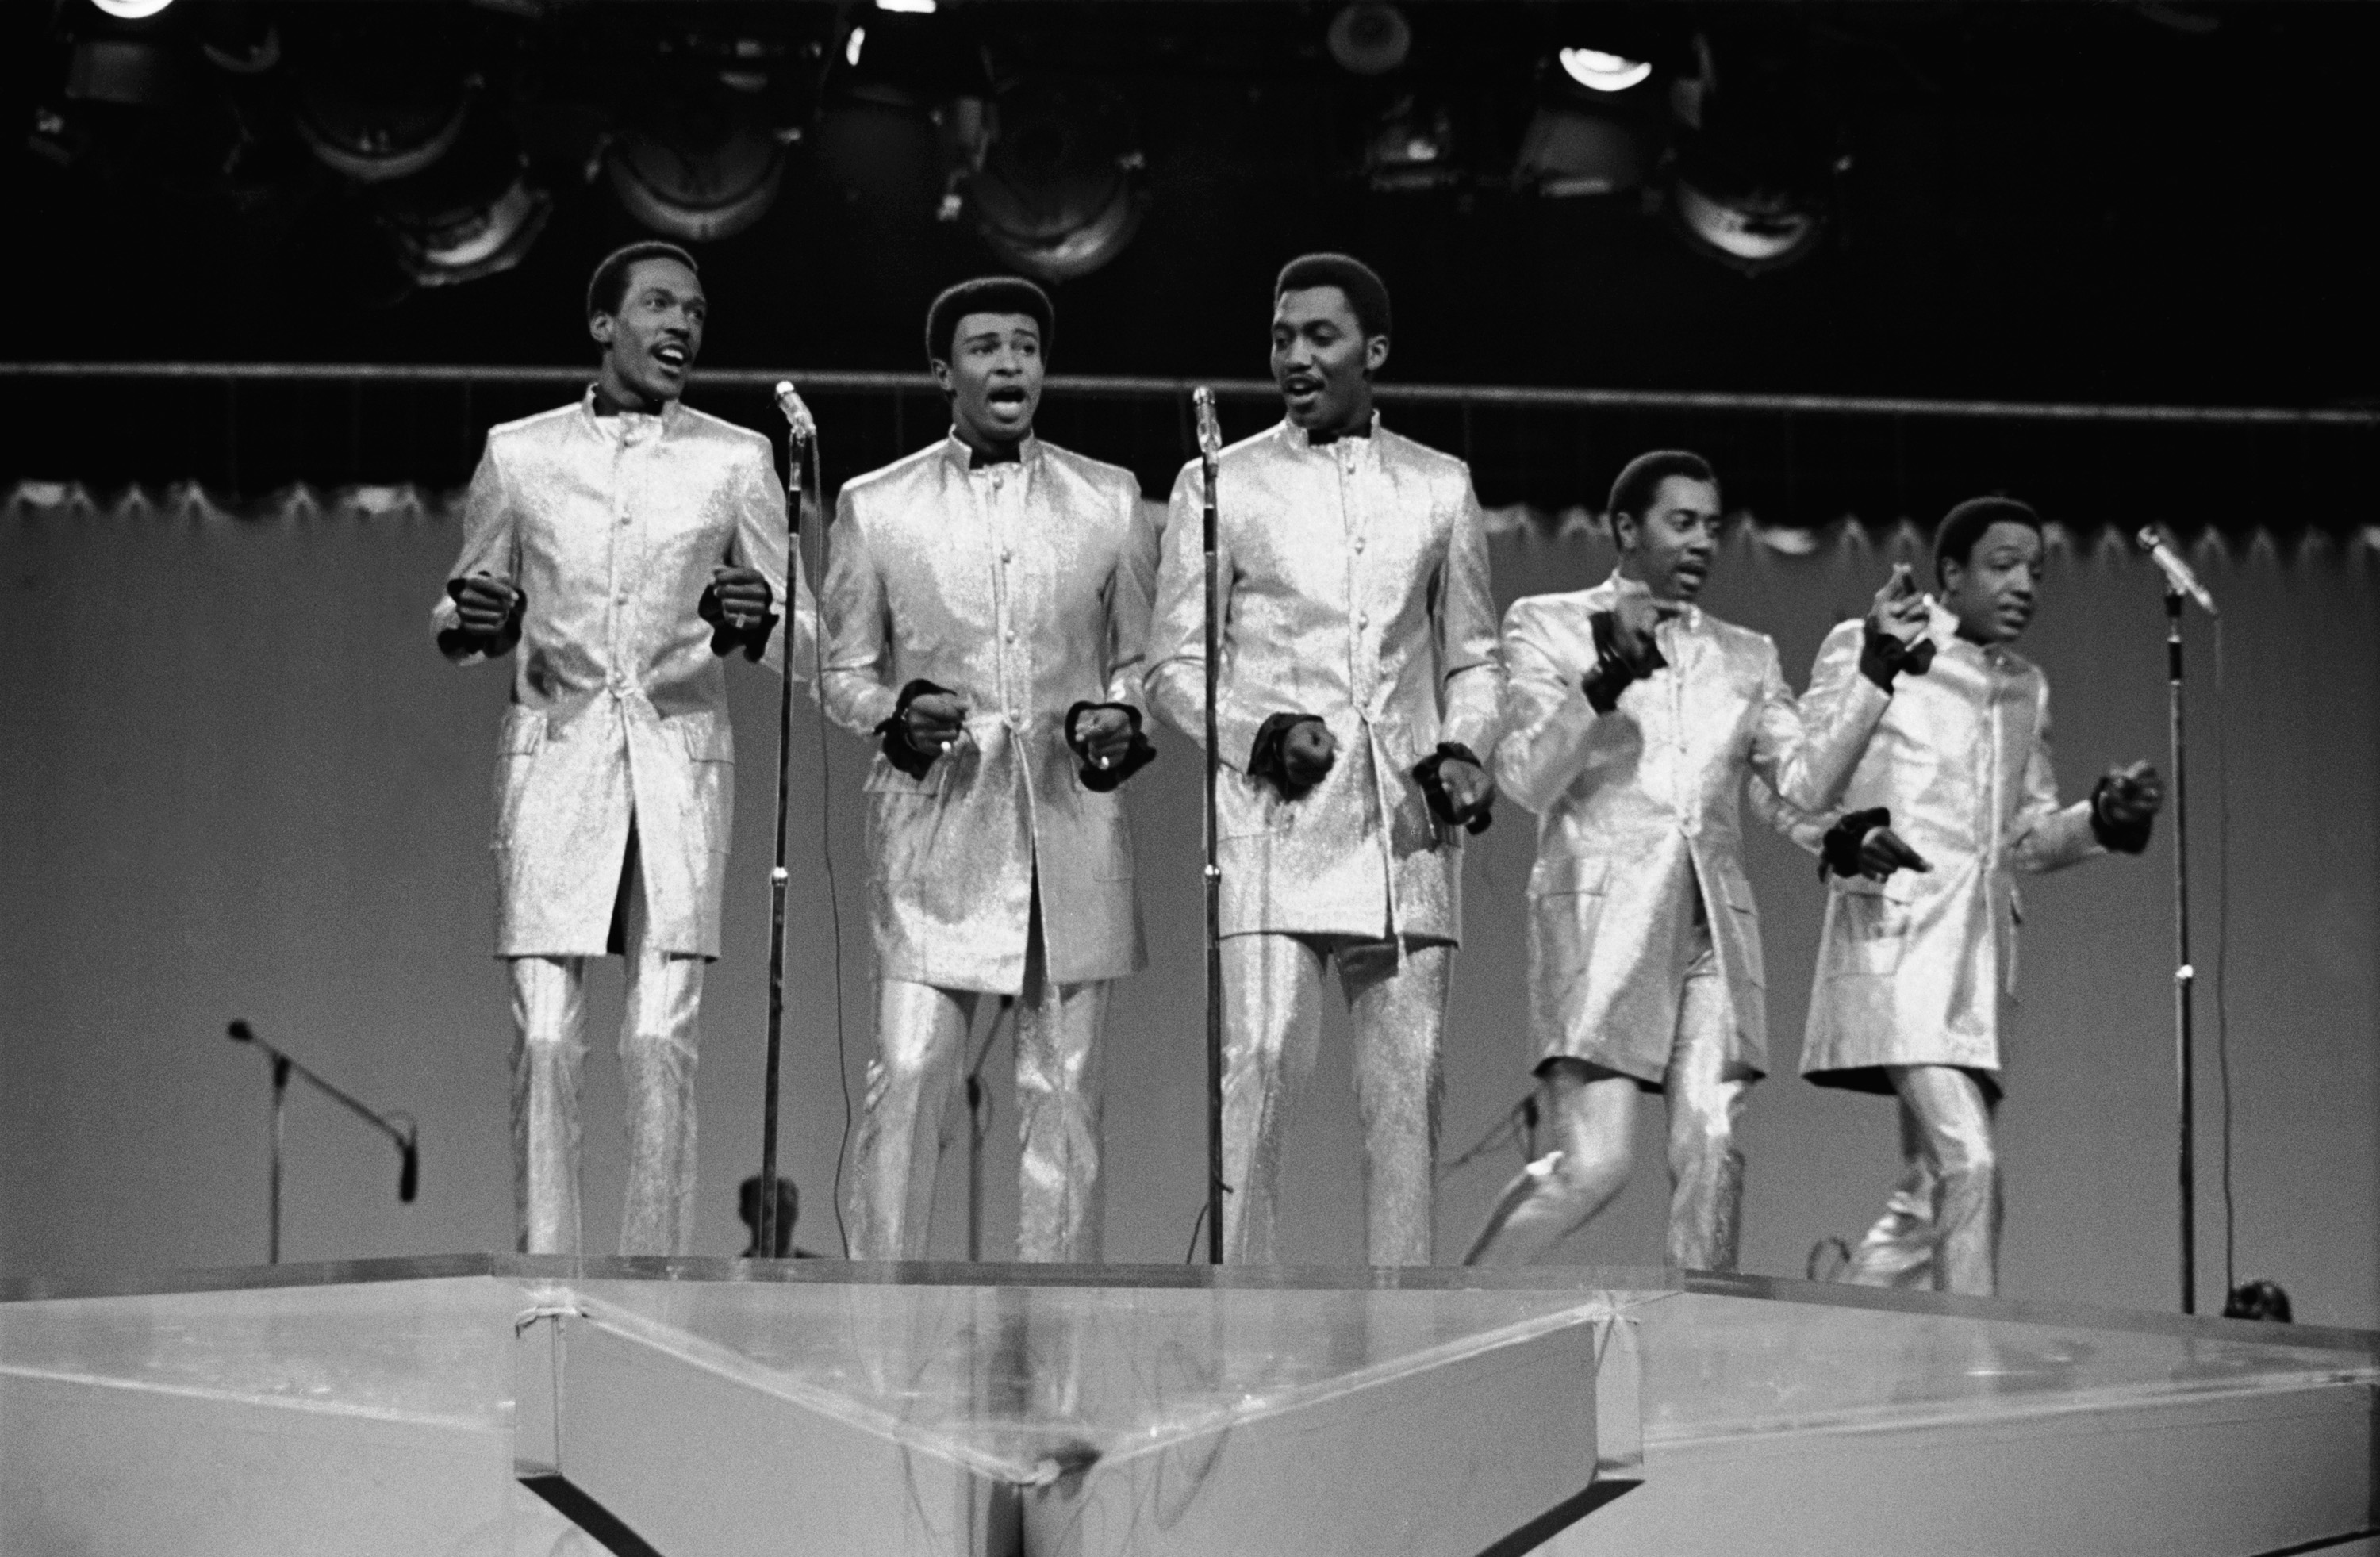 TCB -- Aired 12/9/68 -- Pictured: The Temptations: (l-r) Eddie Kendricks, Dennis Edwards, Otis Williams, Melvin Franklin, Paul Williams (Photo by NBC/NBCU Photo Bank via Getty Images) (NBC—NBC via Getty Images)